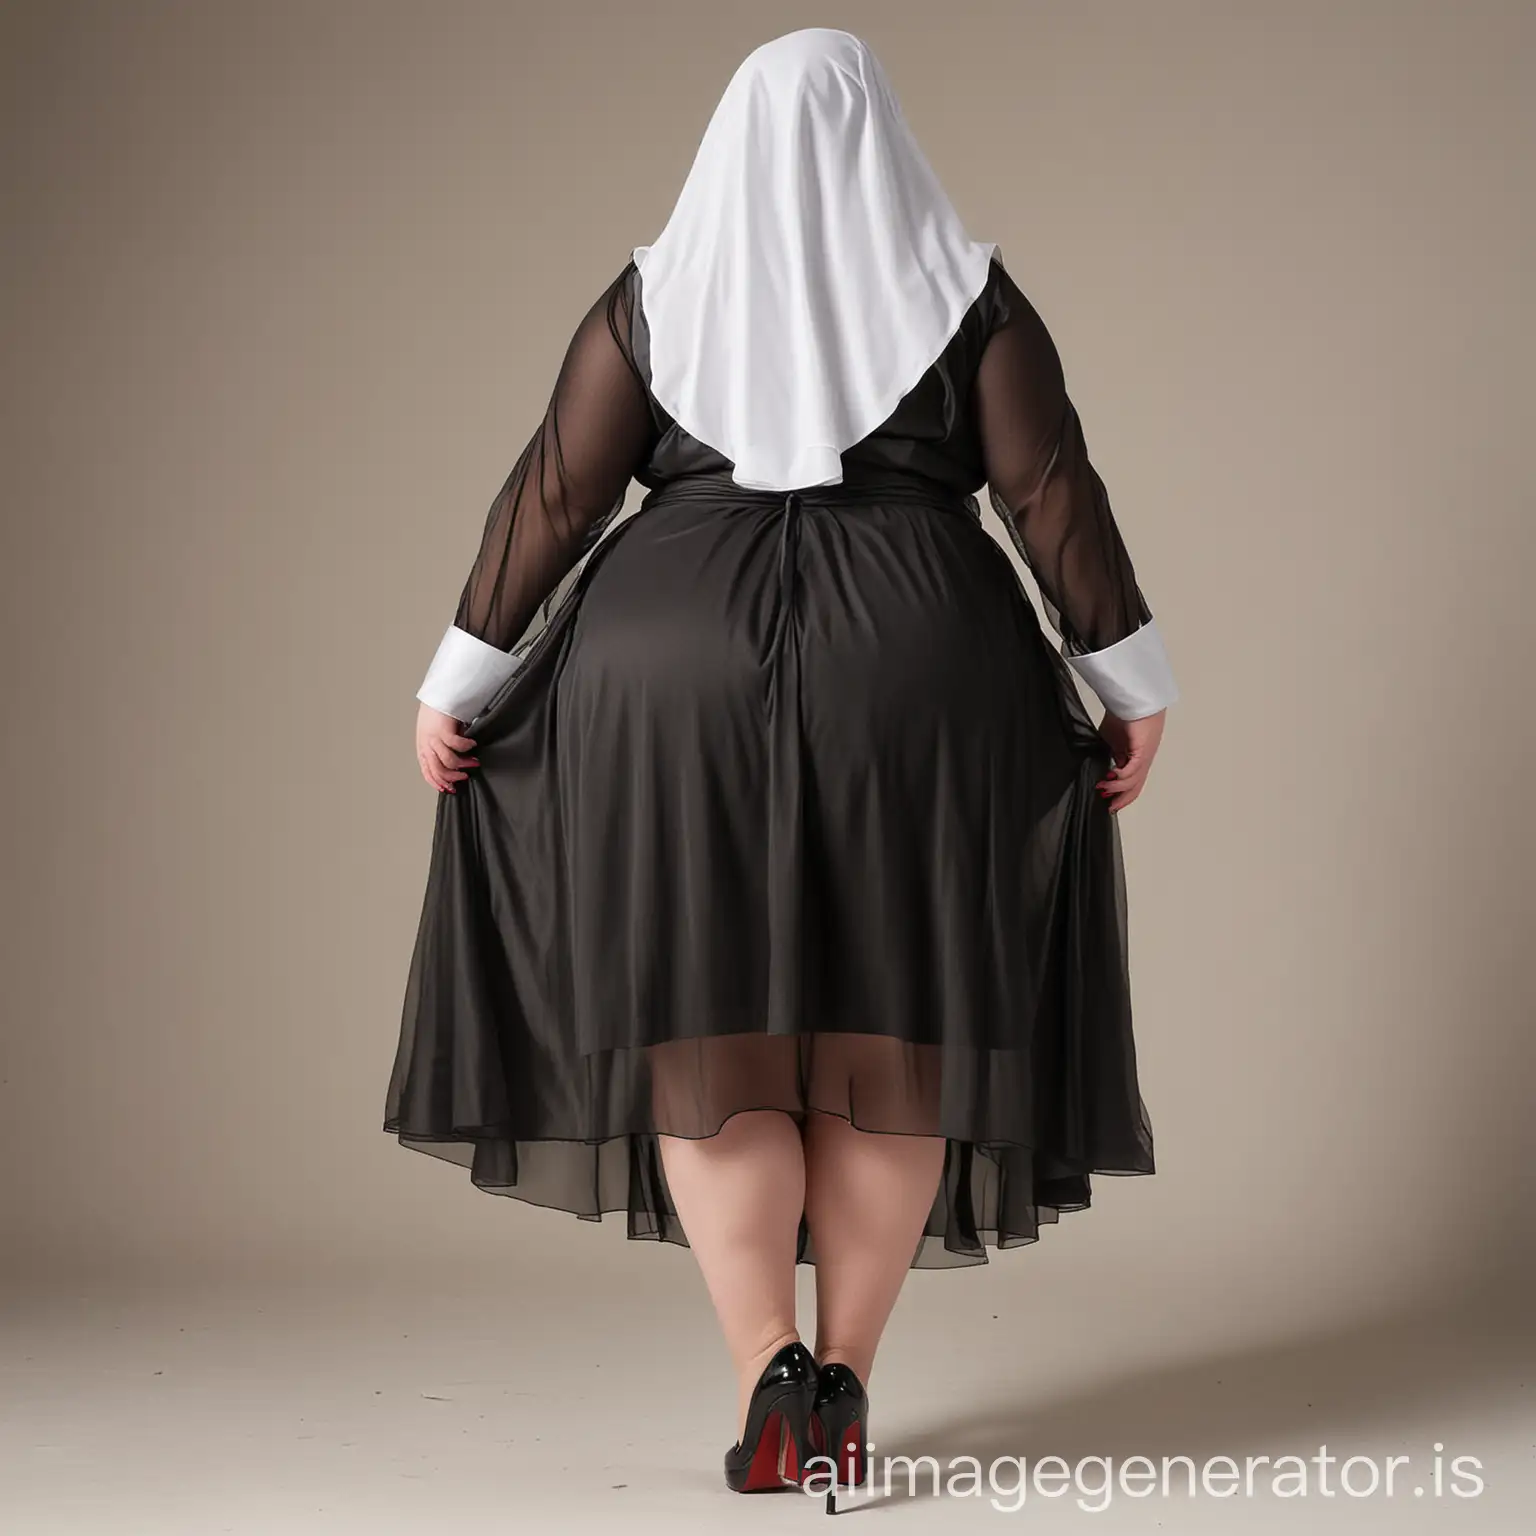 SSBBW-Nun-in-Sheer-Dress-Stands-in-High-Heels-1300-Pounds